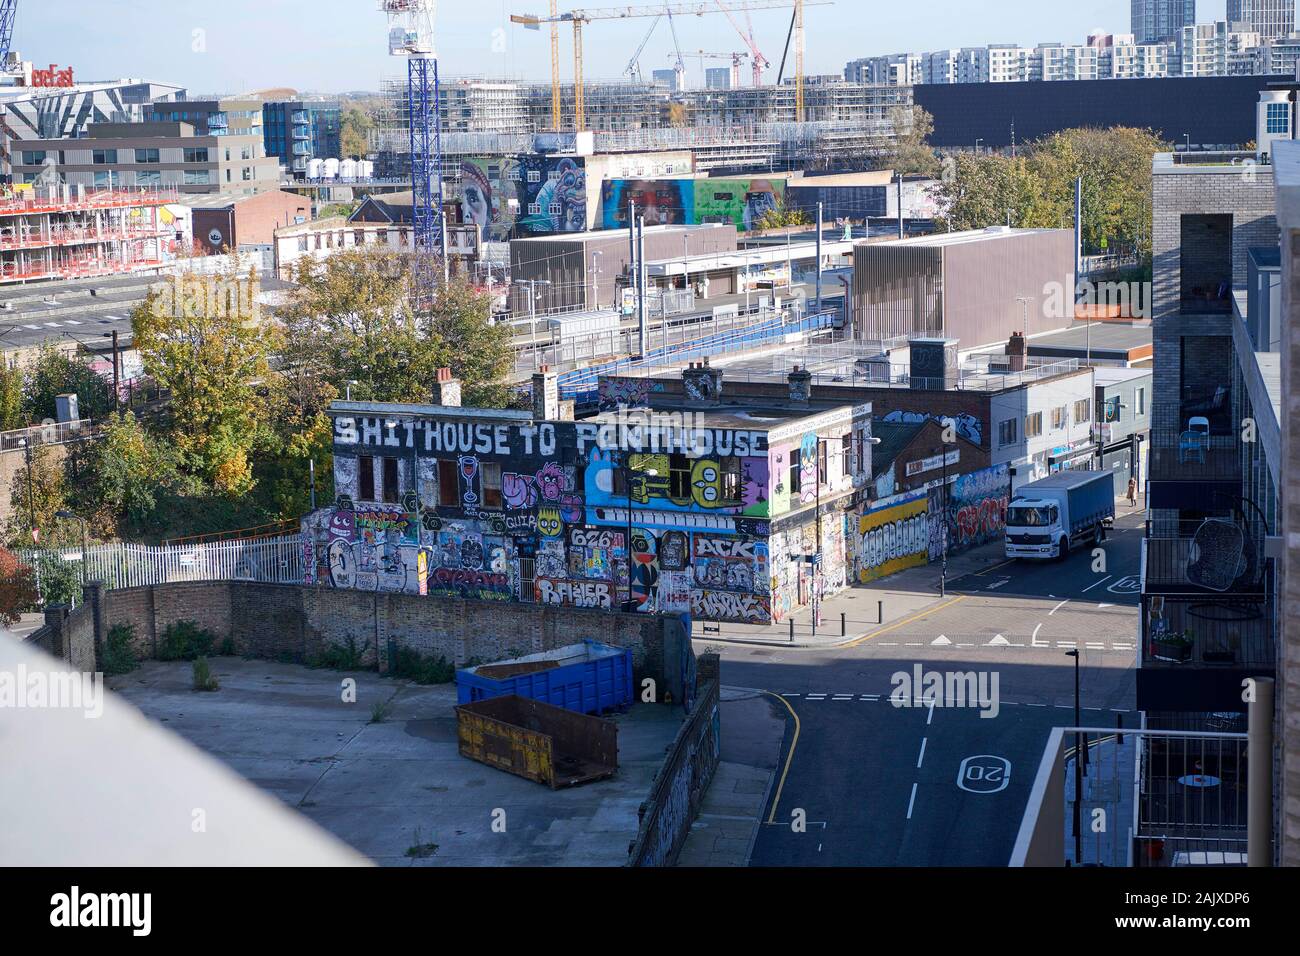 Graffiti objecting to gentrification in Hackney Wick, East end of London, UK Stock Photo